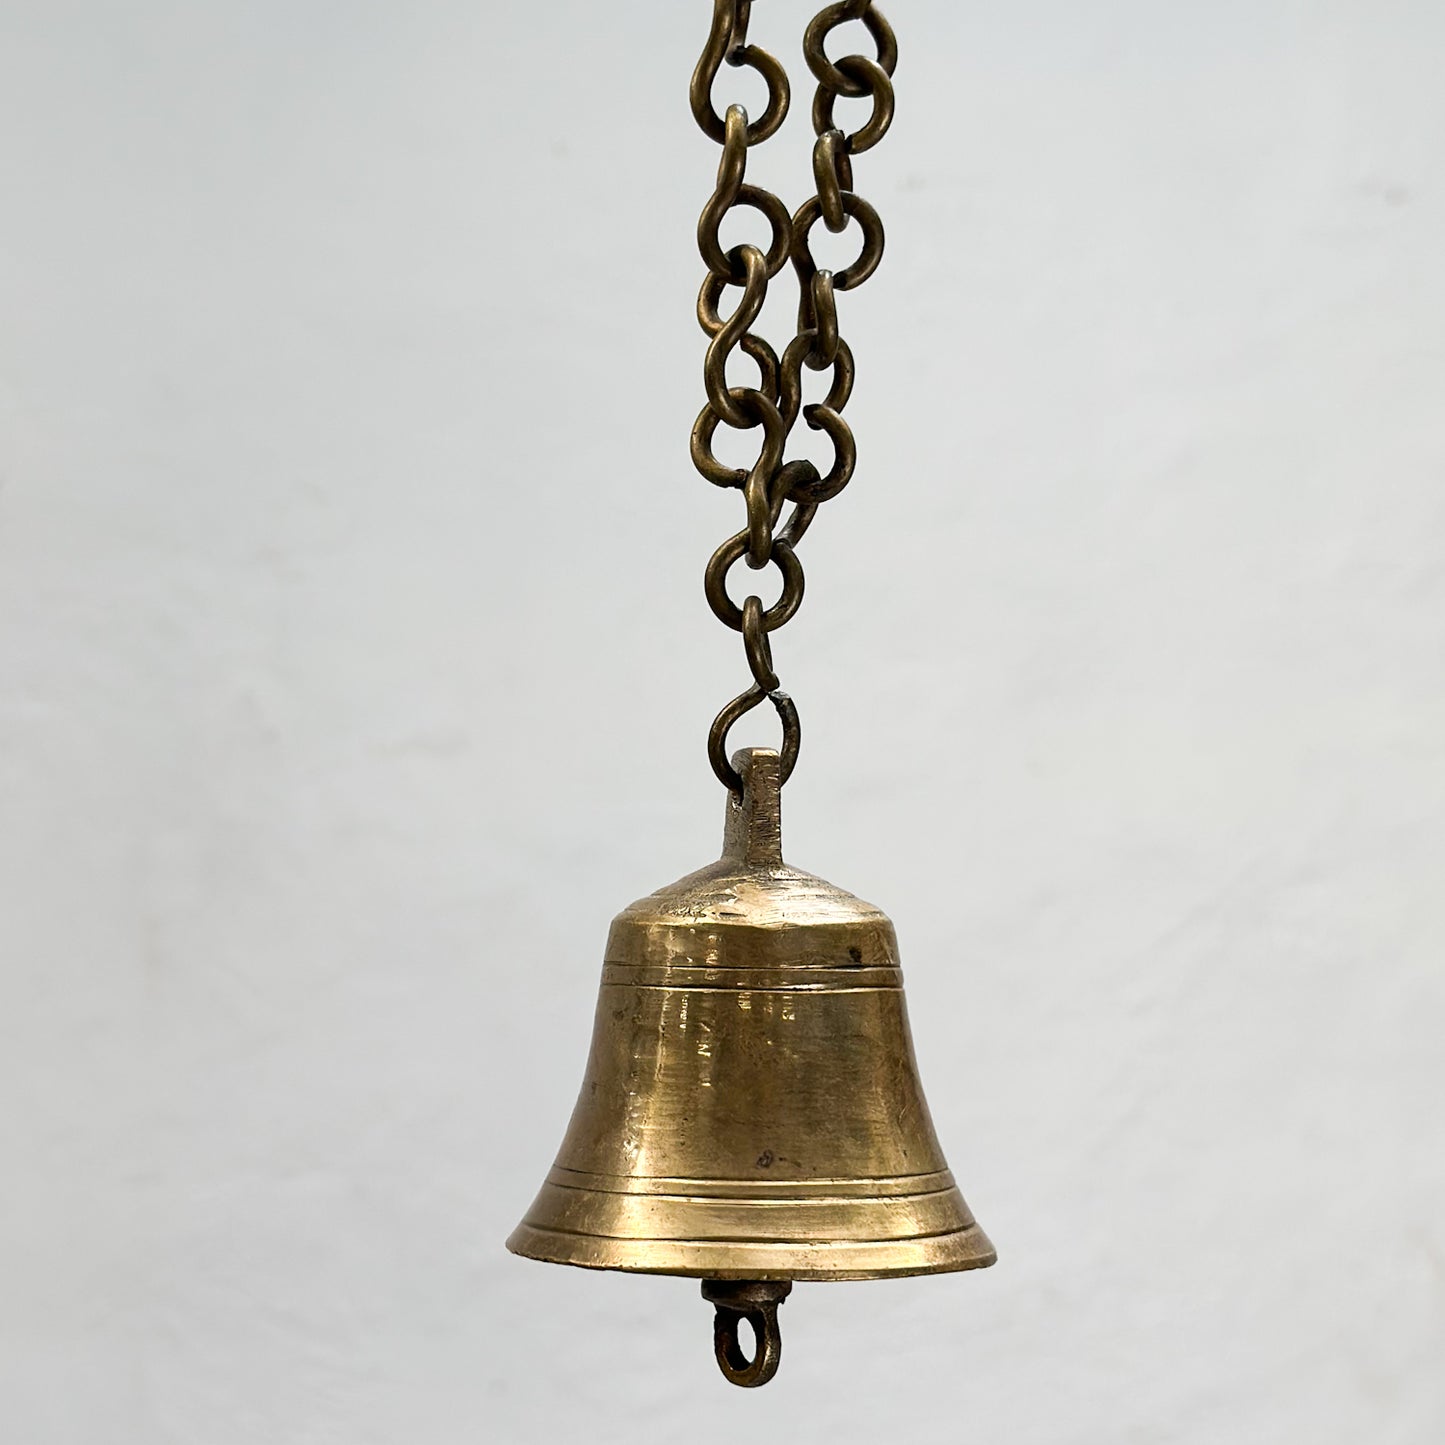 Assorted Vintage Brass Bell with Chain